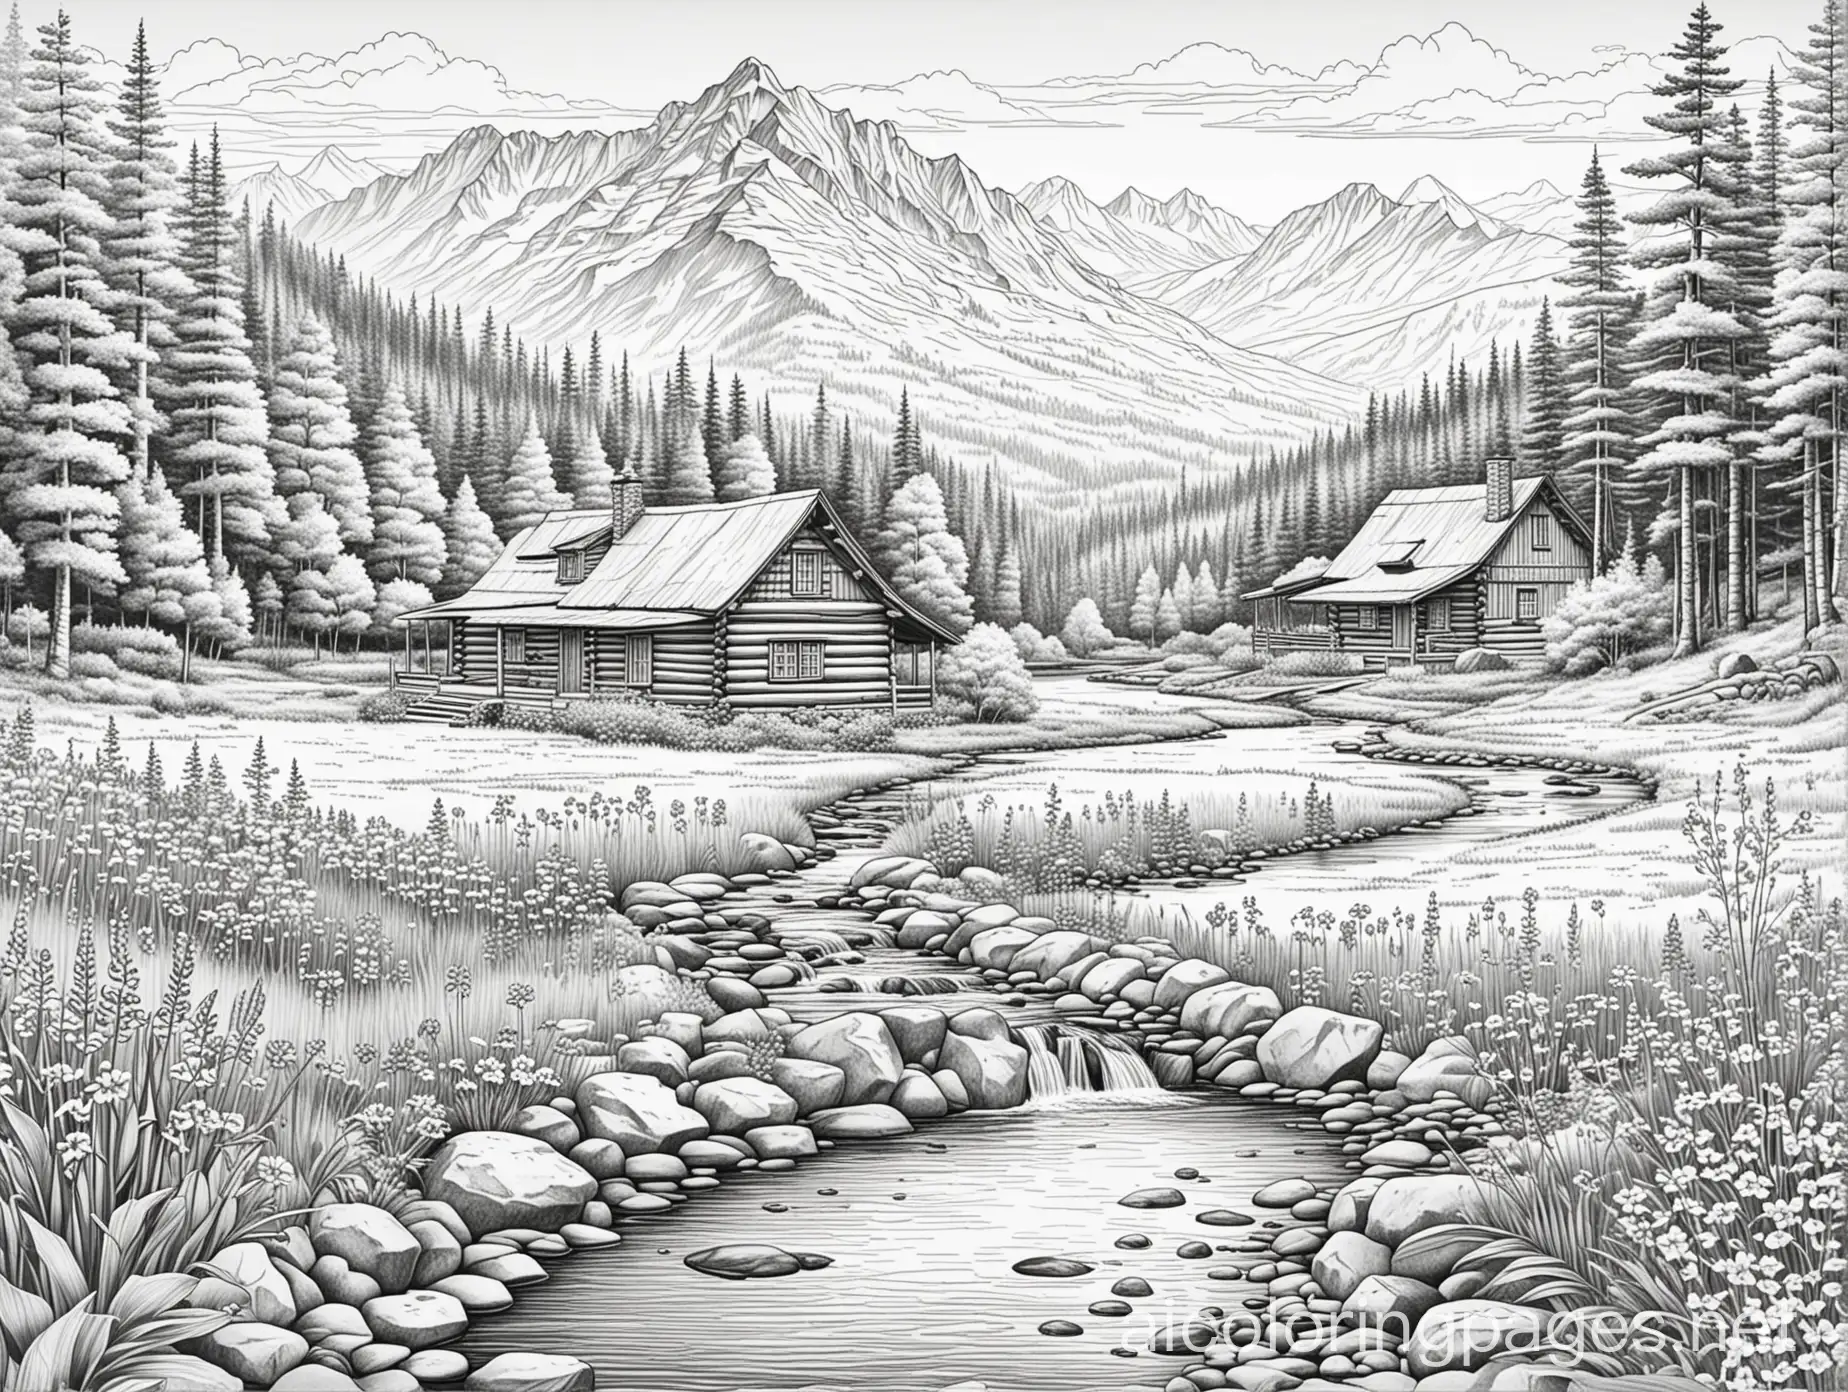 A log cabins at the foot of a mountain with a stream and flowers, Coloring Page, black and white, line art, white background, Simplicity, Ample White Space. The background of the coloring page is plain white to make it easy for young children to color within the lines. The outlines of all the subjects are easy to distinguish, making it simple for kids to color without too much difficulty